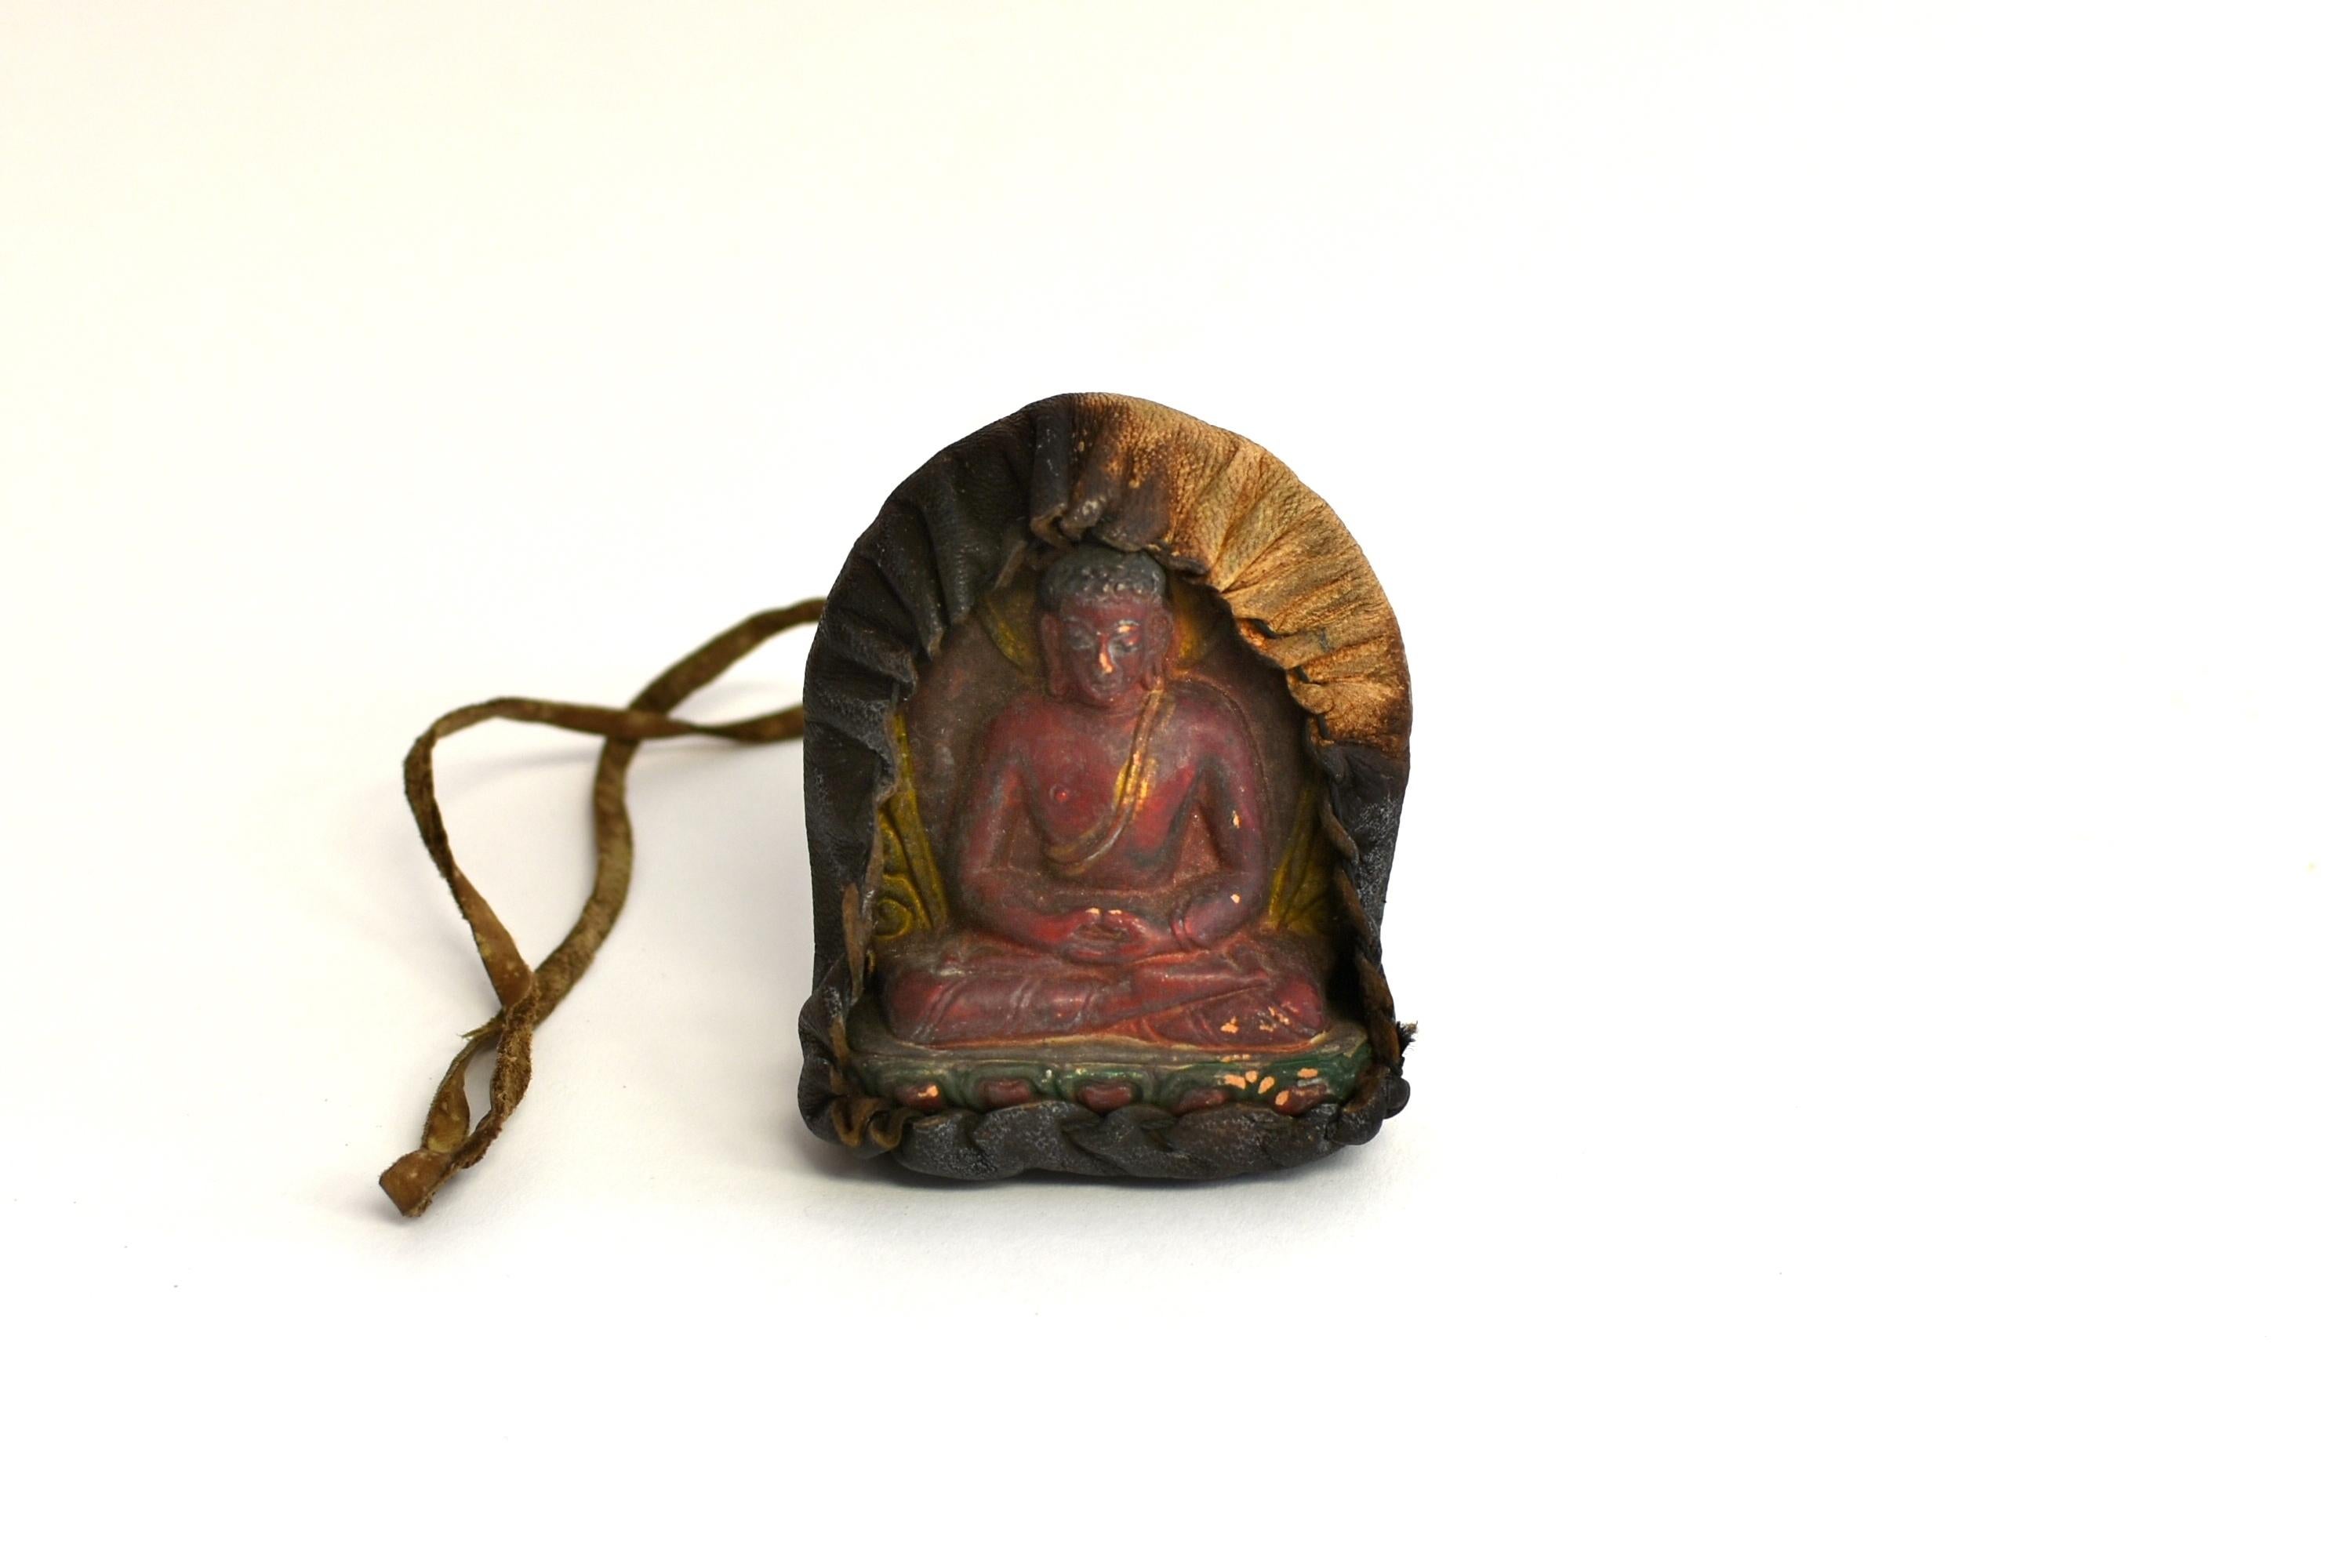 Hand-Carved Antique Leather Tibetan Amulet with Meditative Buddha 